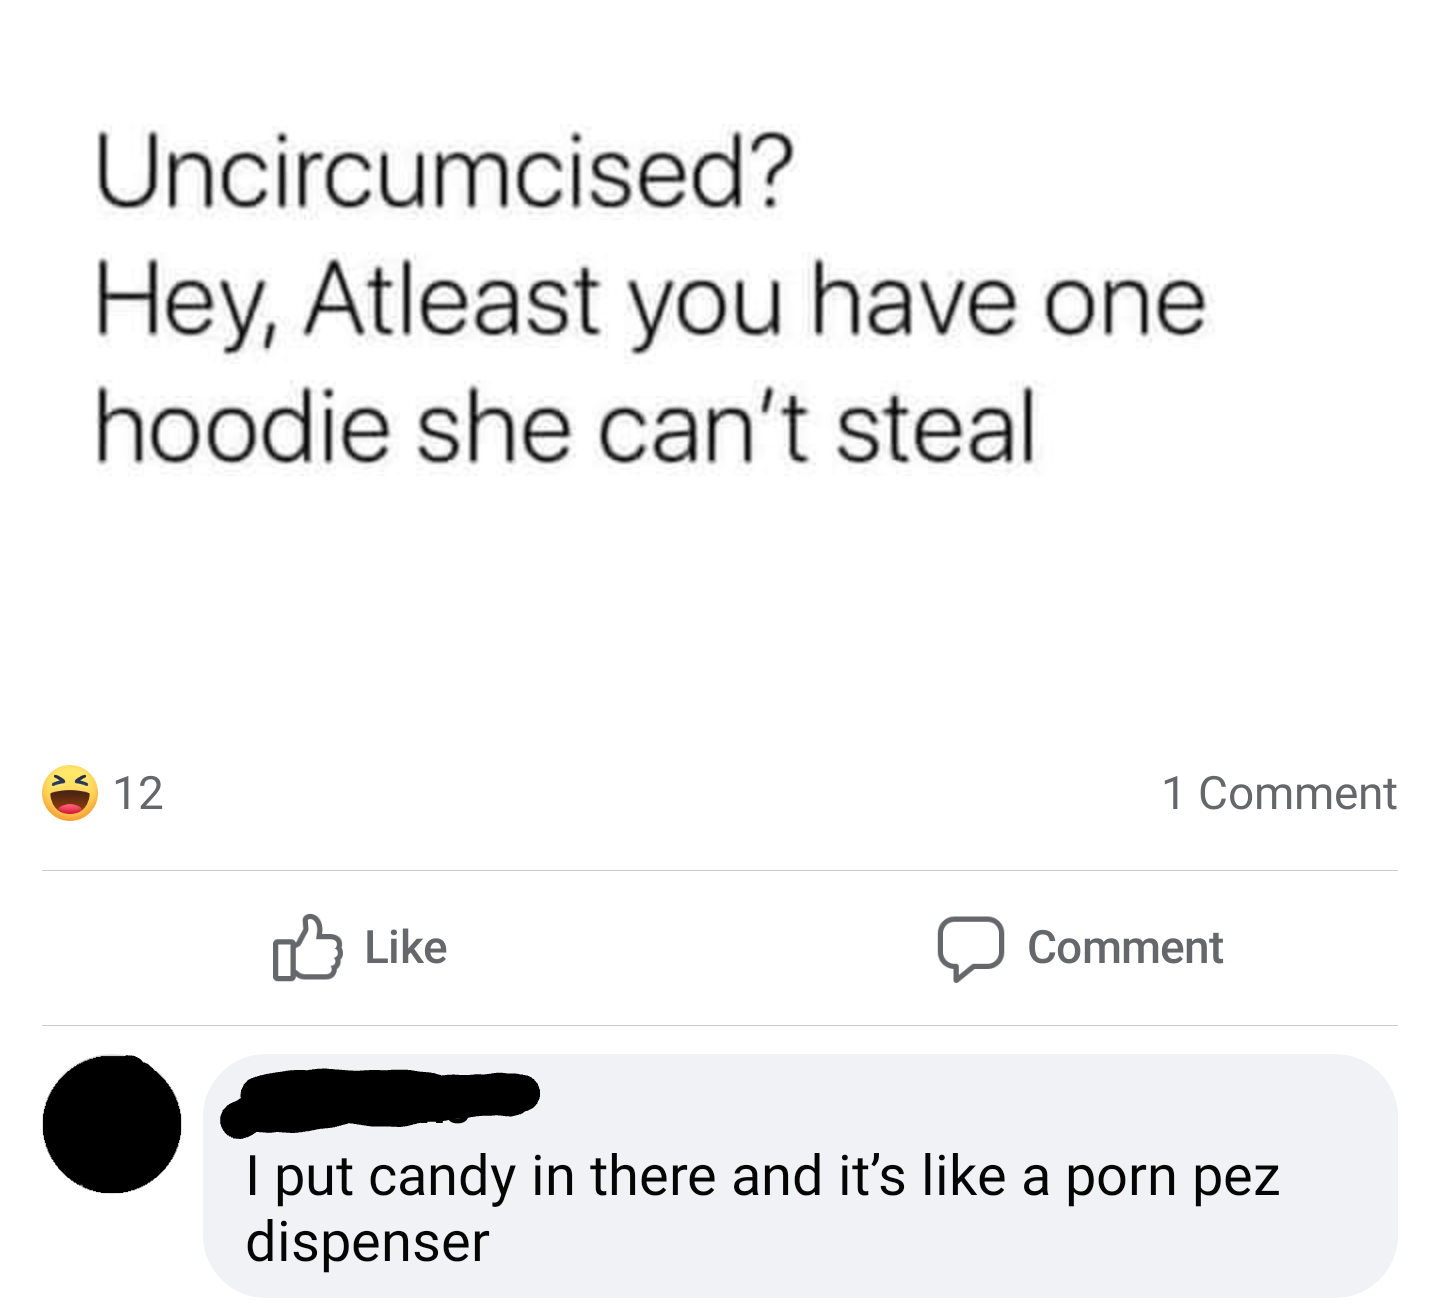 paper - Uncircumcised? Hey, Atleast you have one hoodie she can't steal 12 1 Comment Comment I put candy in there and it's a porn pez dispenser